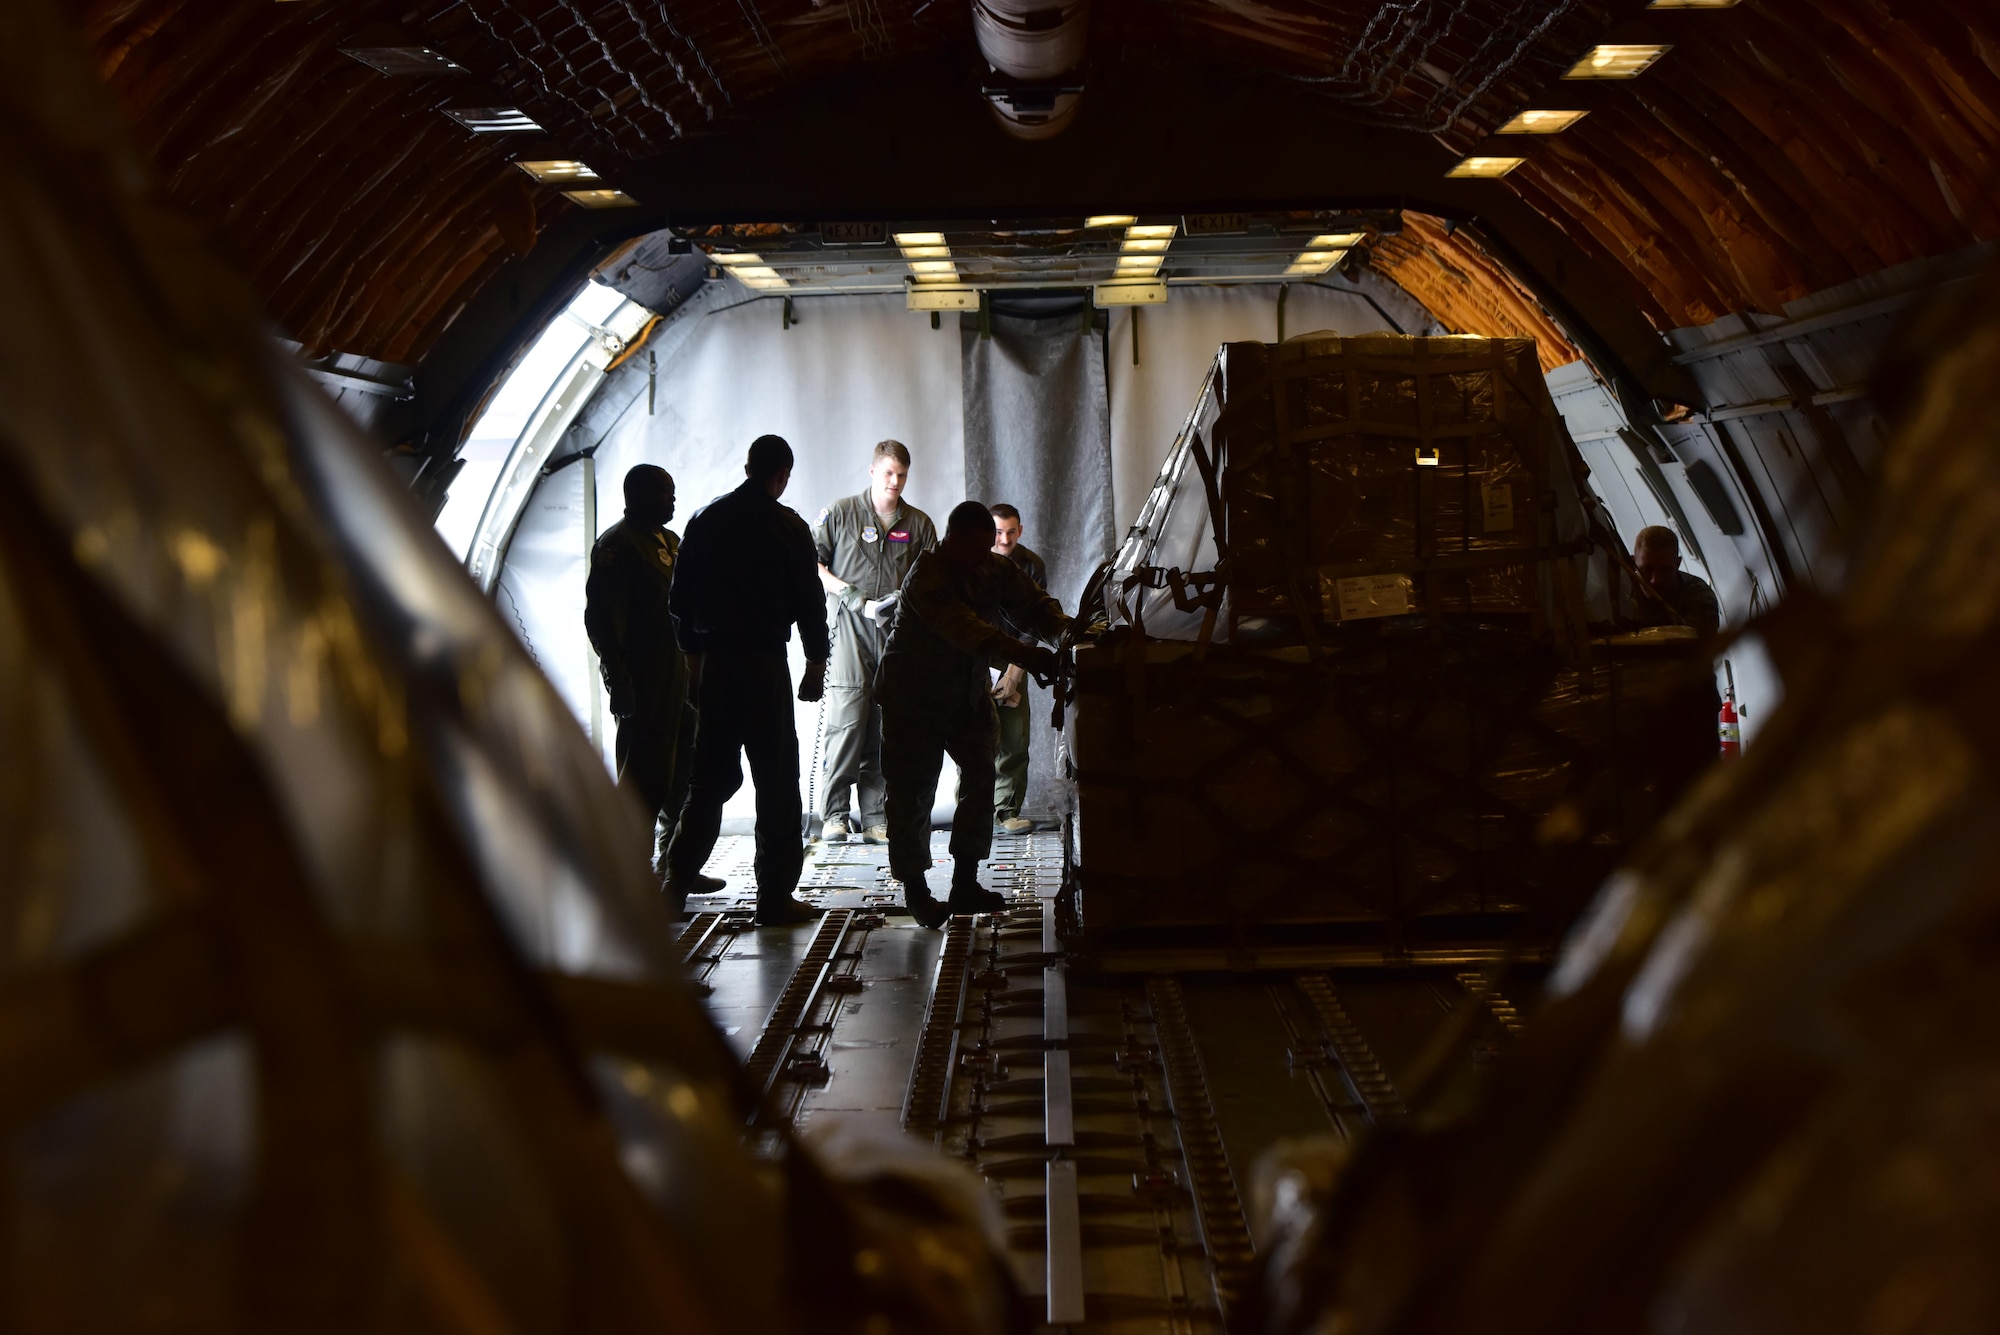 Airmen with the 509th and 131st Logistics Readiness Squadrons load a KC-10 Extender aircraft with 70 pallets of food in support of Convoy of Hope at Whiteman Air Force Base, Mo., April 1, 2017. More than 84,000 pounds of fortified rice and soy protein were convoyed in an initiative to feed more than 65,000 children in Haiti. (U.S. Air Force photo by Senior Airman Jovan Banks)